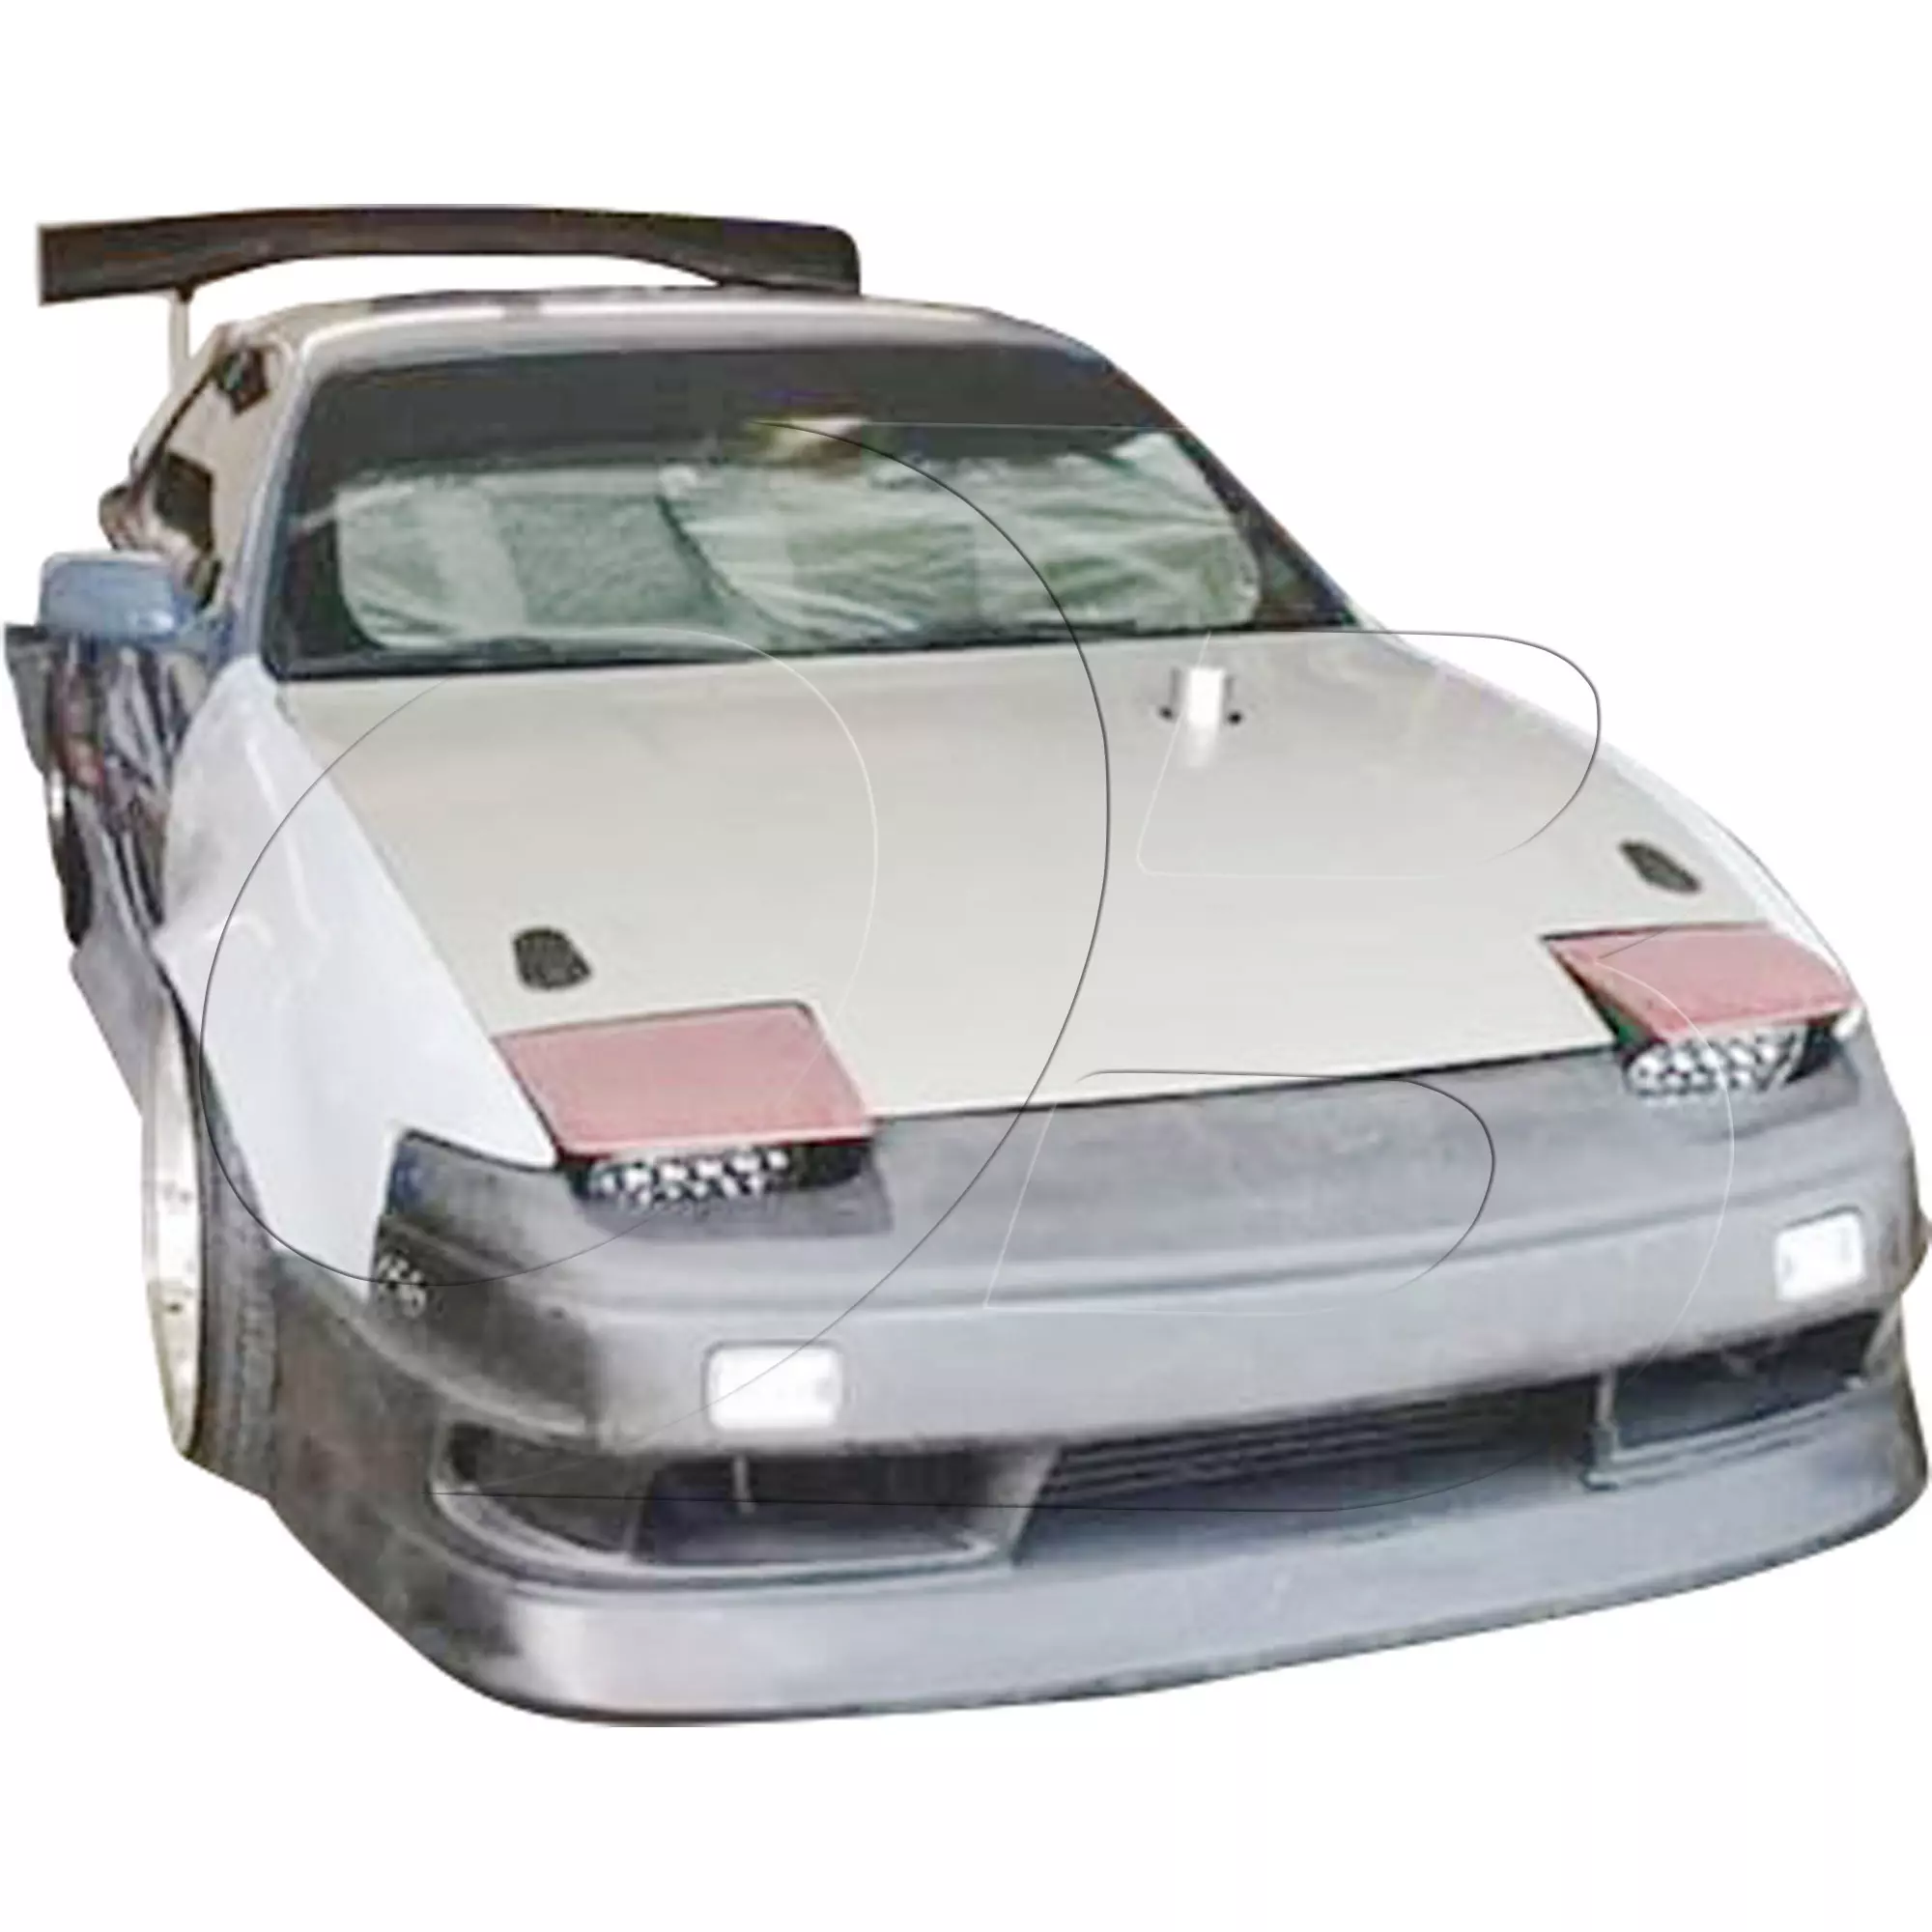 KBD Urethane Bsport2 Style 4pc Full Body Kit > Nissan 240SX 1989-1994 > 2dr Coupe - Image 38